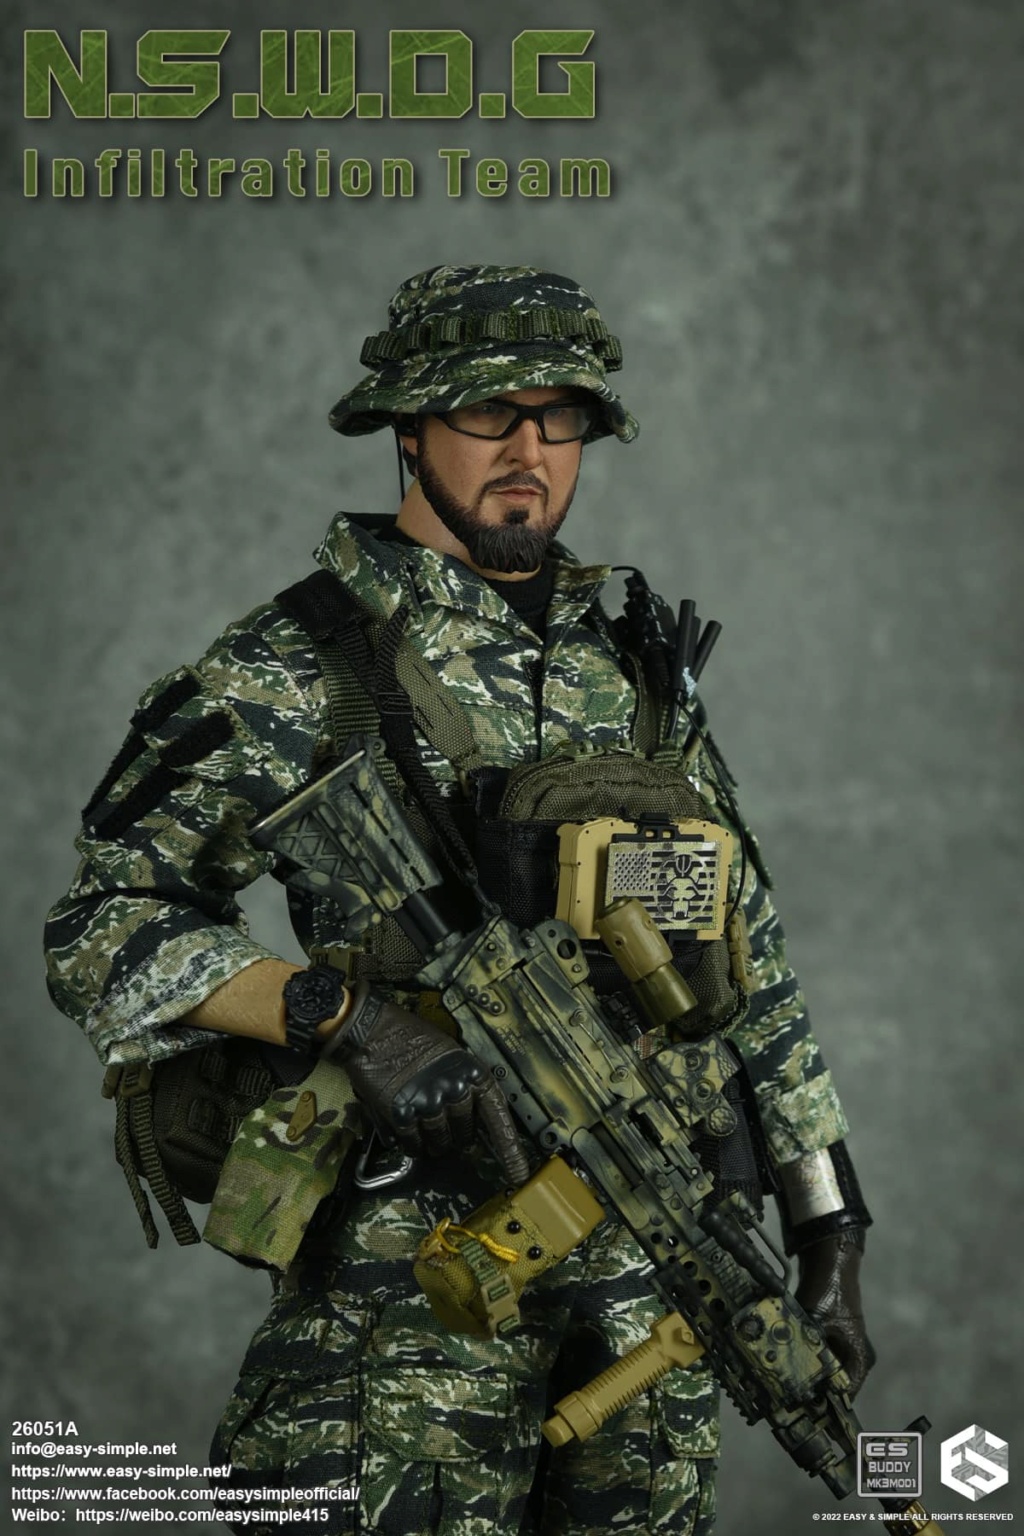 easy - NEW PRODUCT: EASY AND SIMPLE 1/6 SCALE FIGURE: N.S.W.D.G INFILTRATION TEAM - (2 Versions) 16371